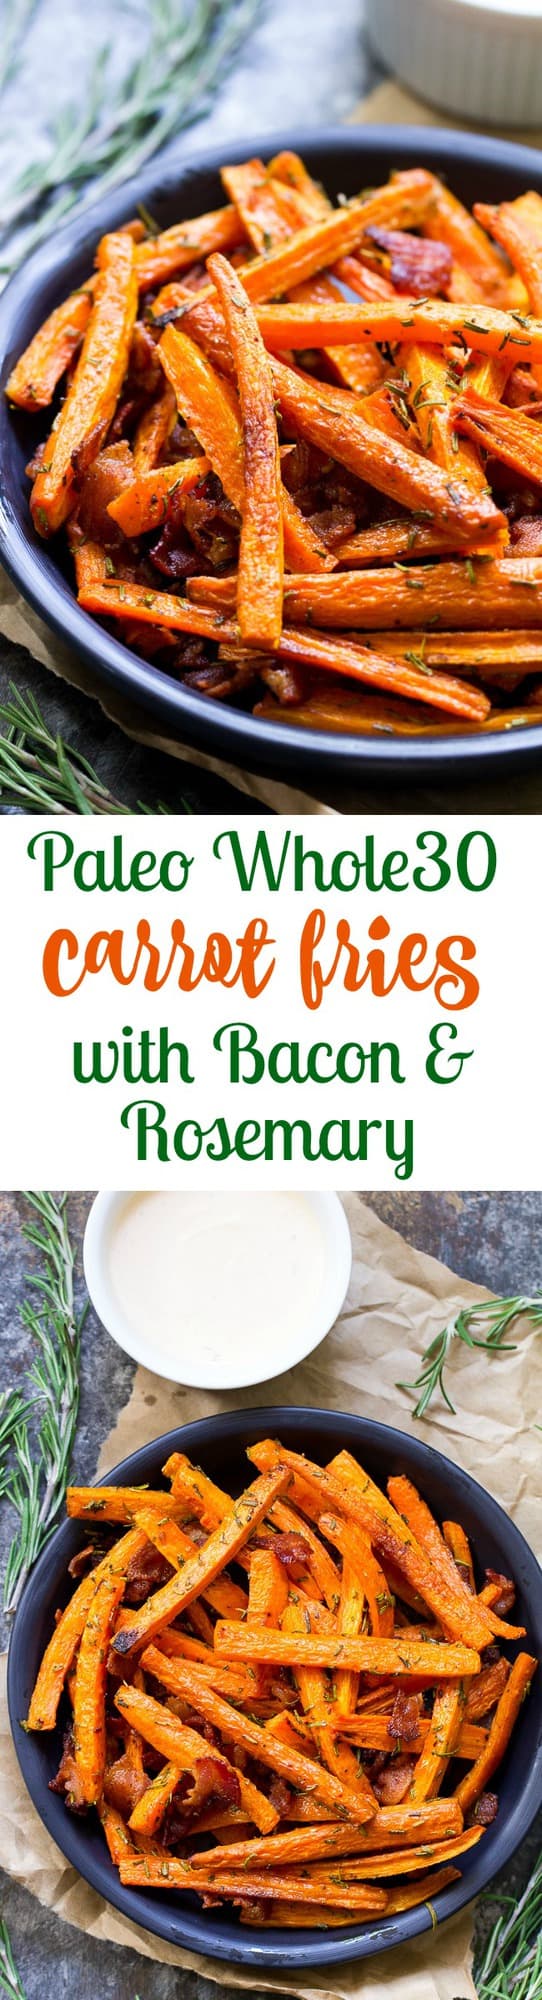 These carrot fries are roasted to crispy perfection with rosemary and tossed with savory crumbled bacon for a fun and healthy appetizer, snack or side dish! Paleo, Whole30 compliant and low carb.